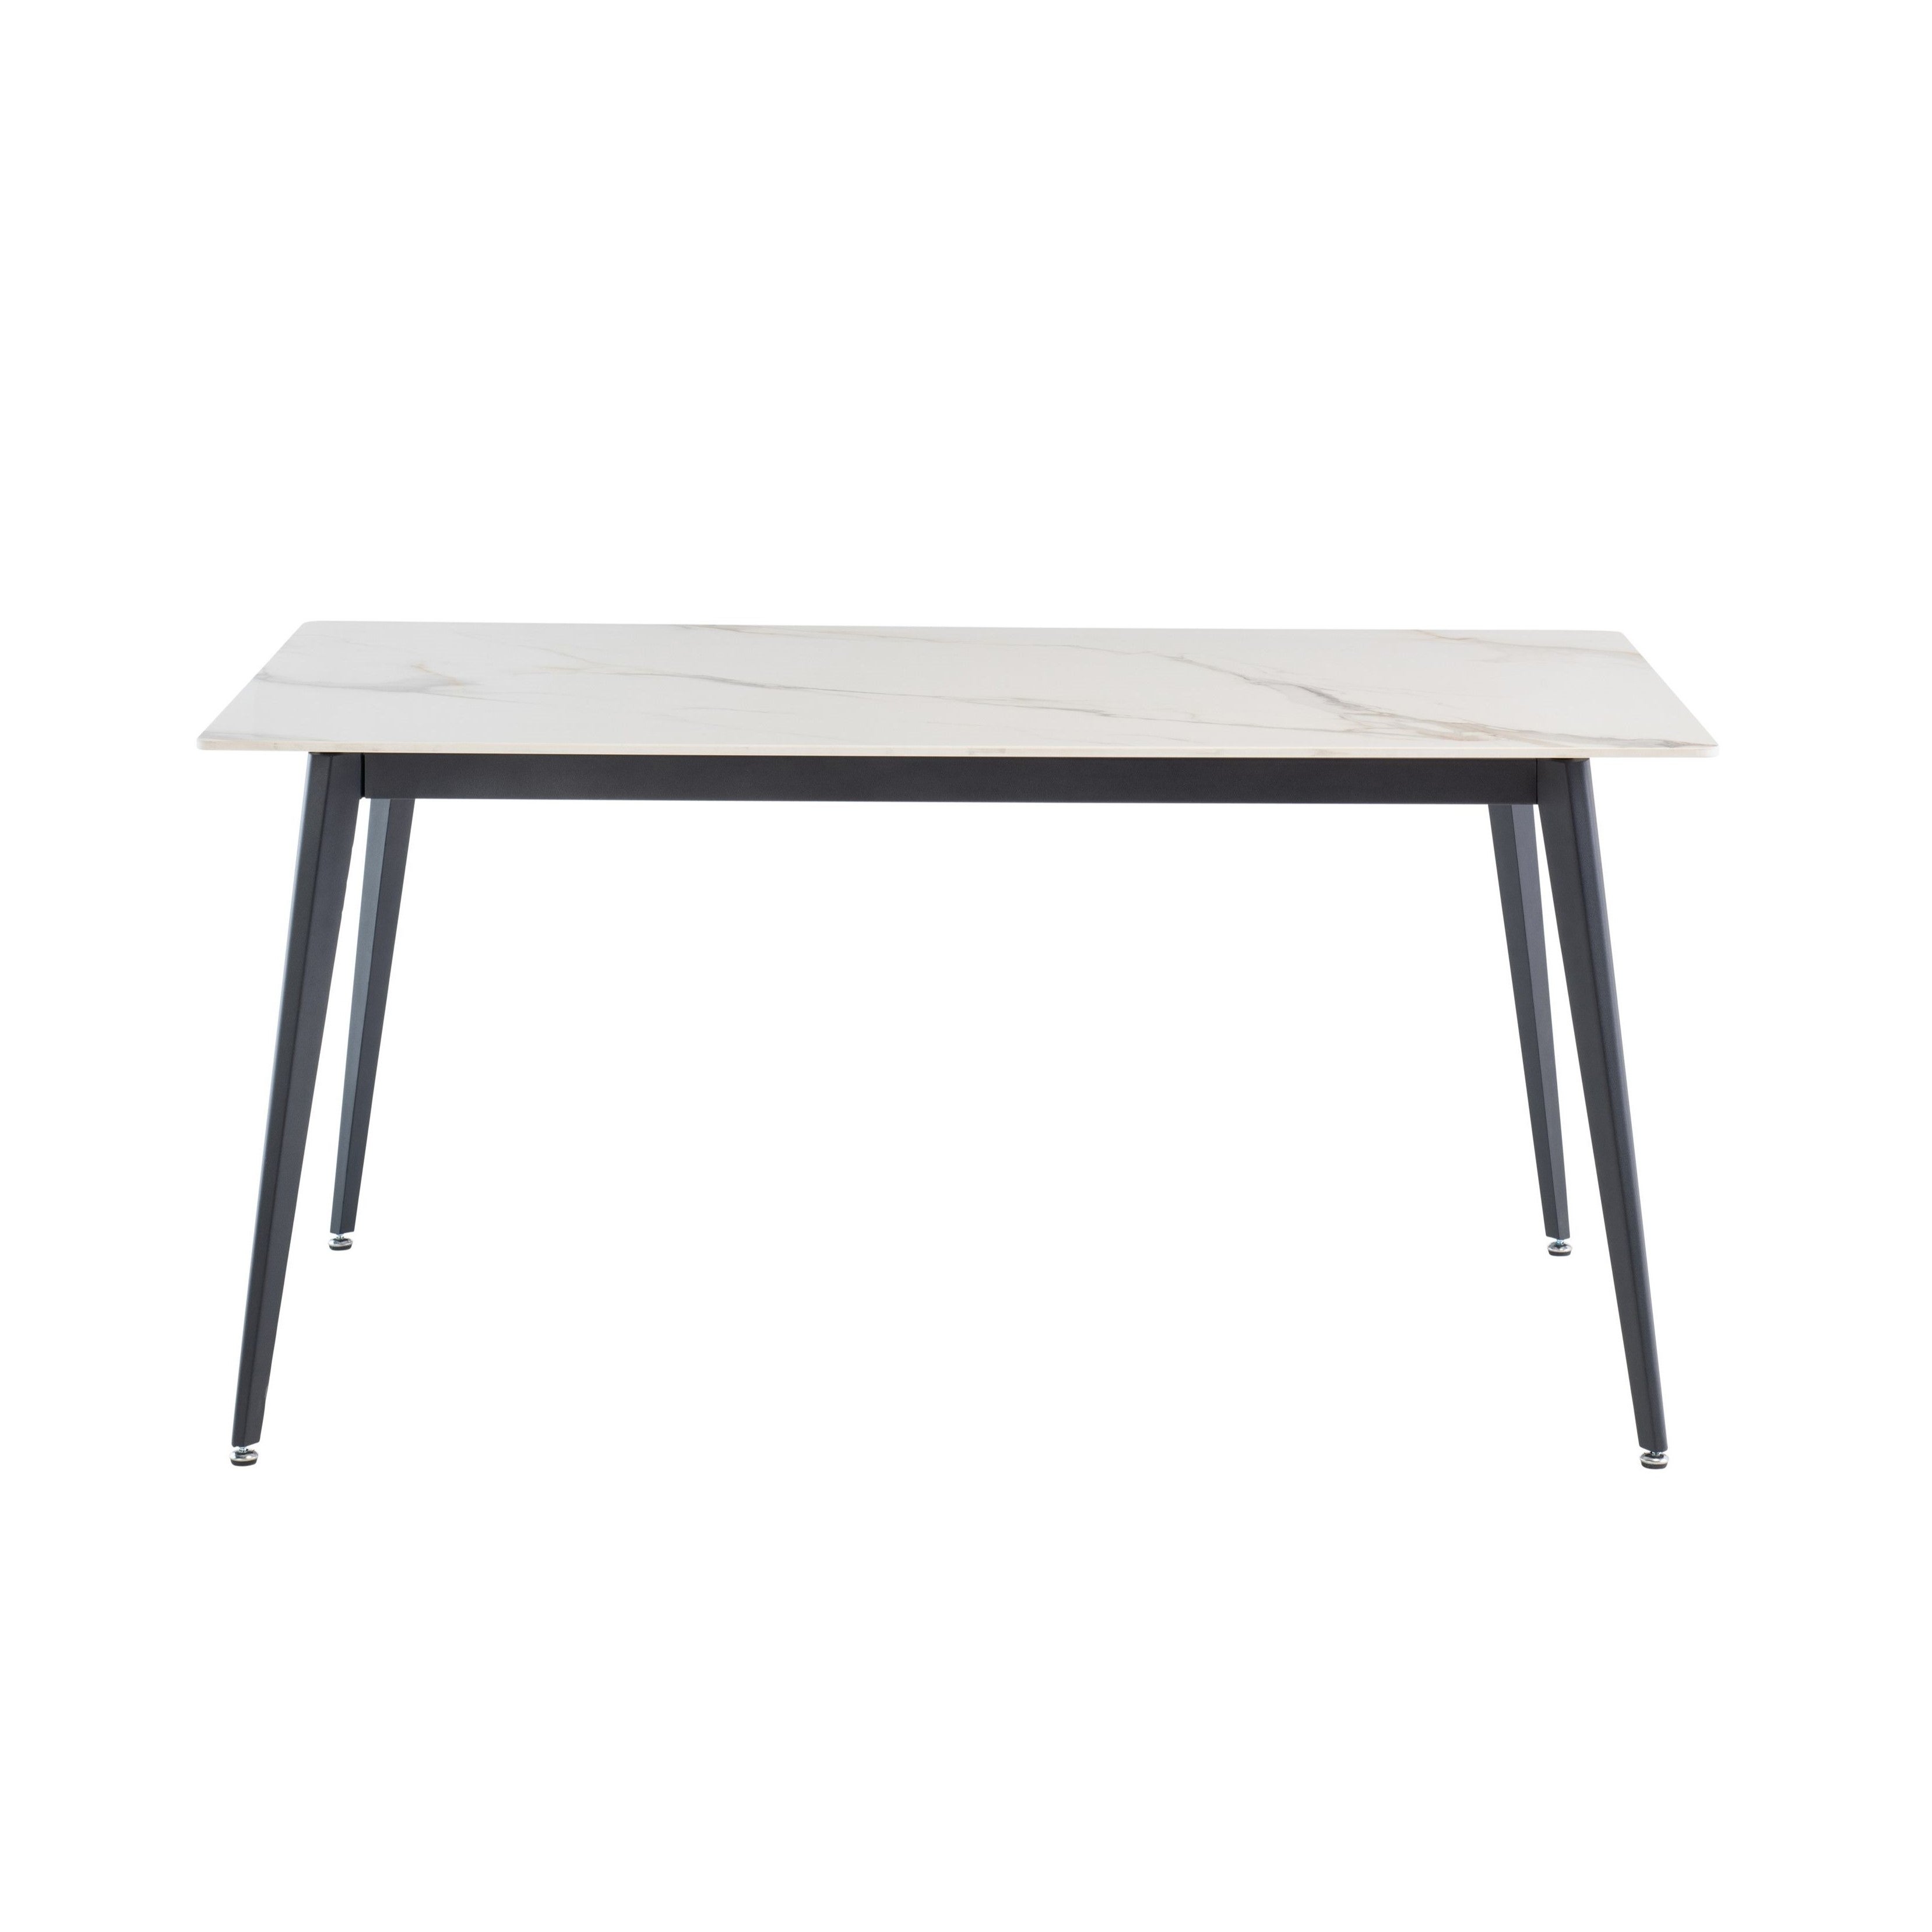 Ivy 6 Seater Dining Table Sintered Stone Grey